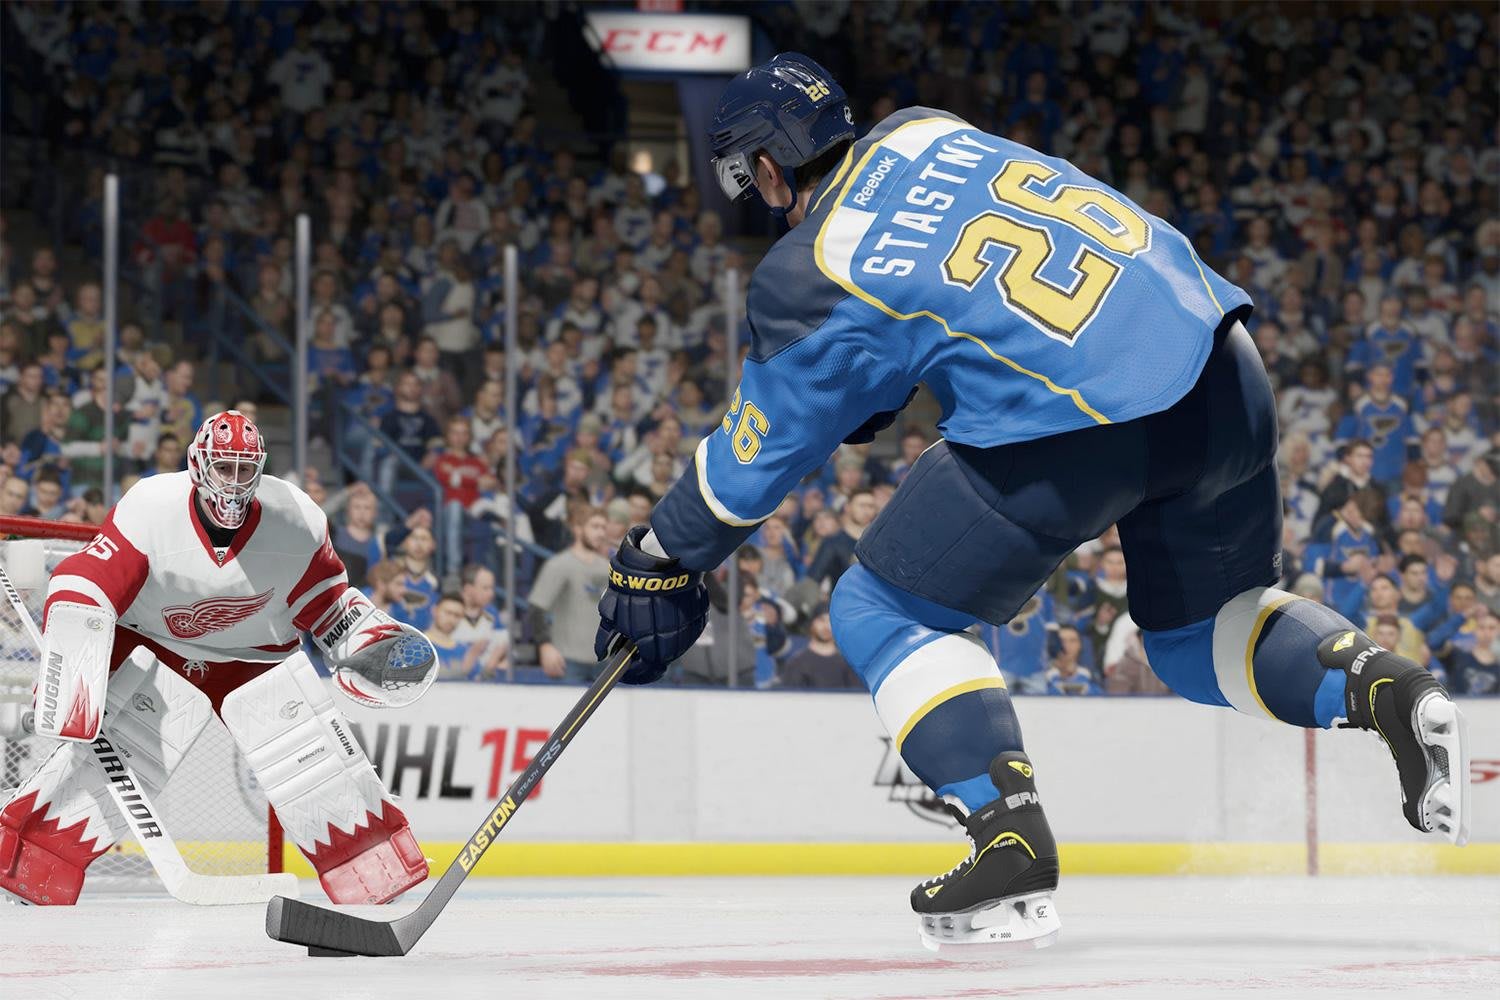 What we want from NHL 16